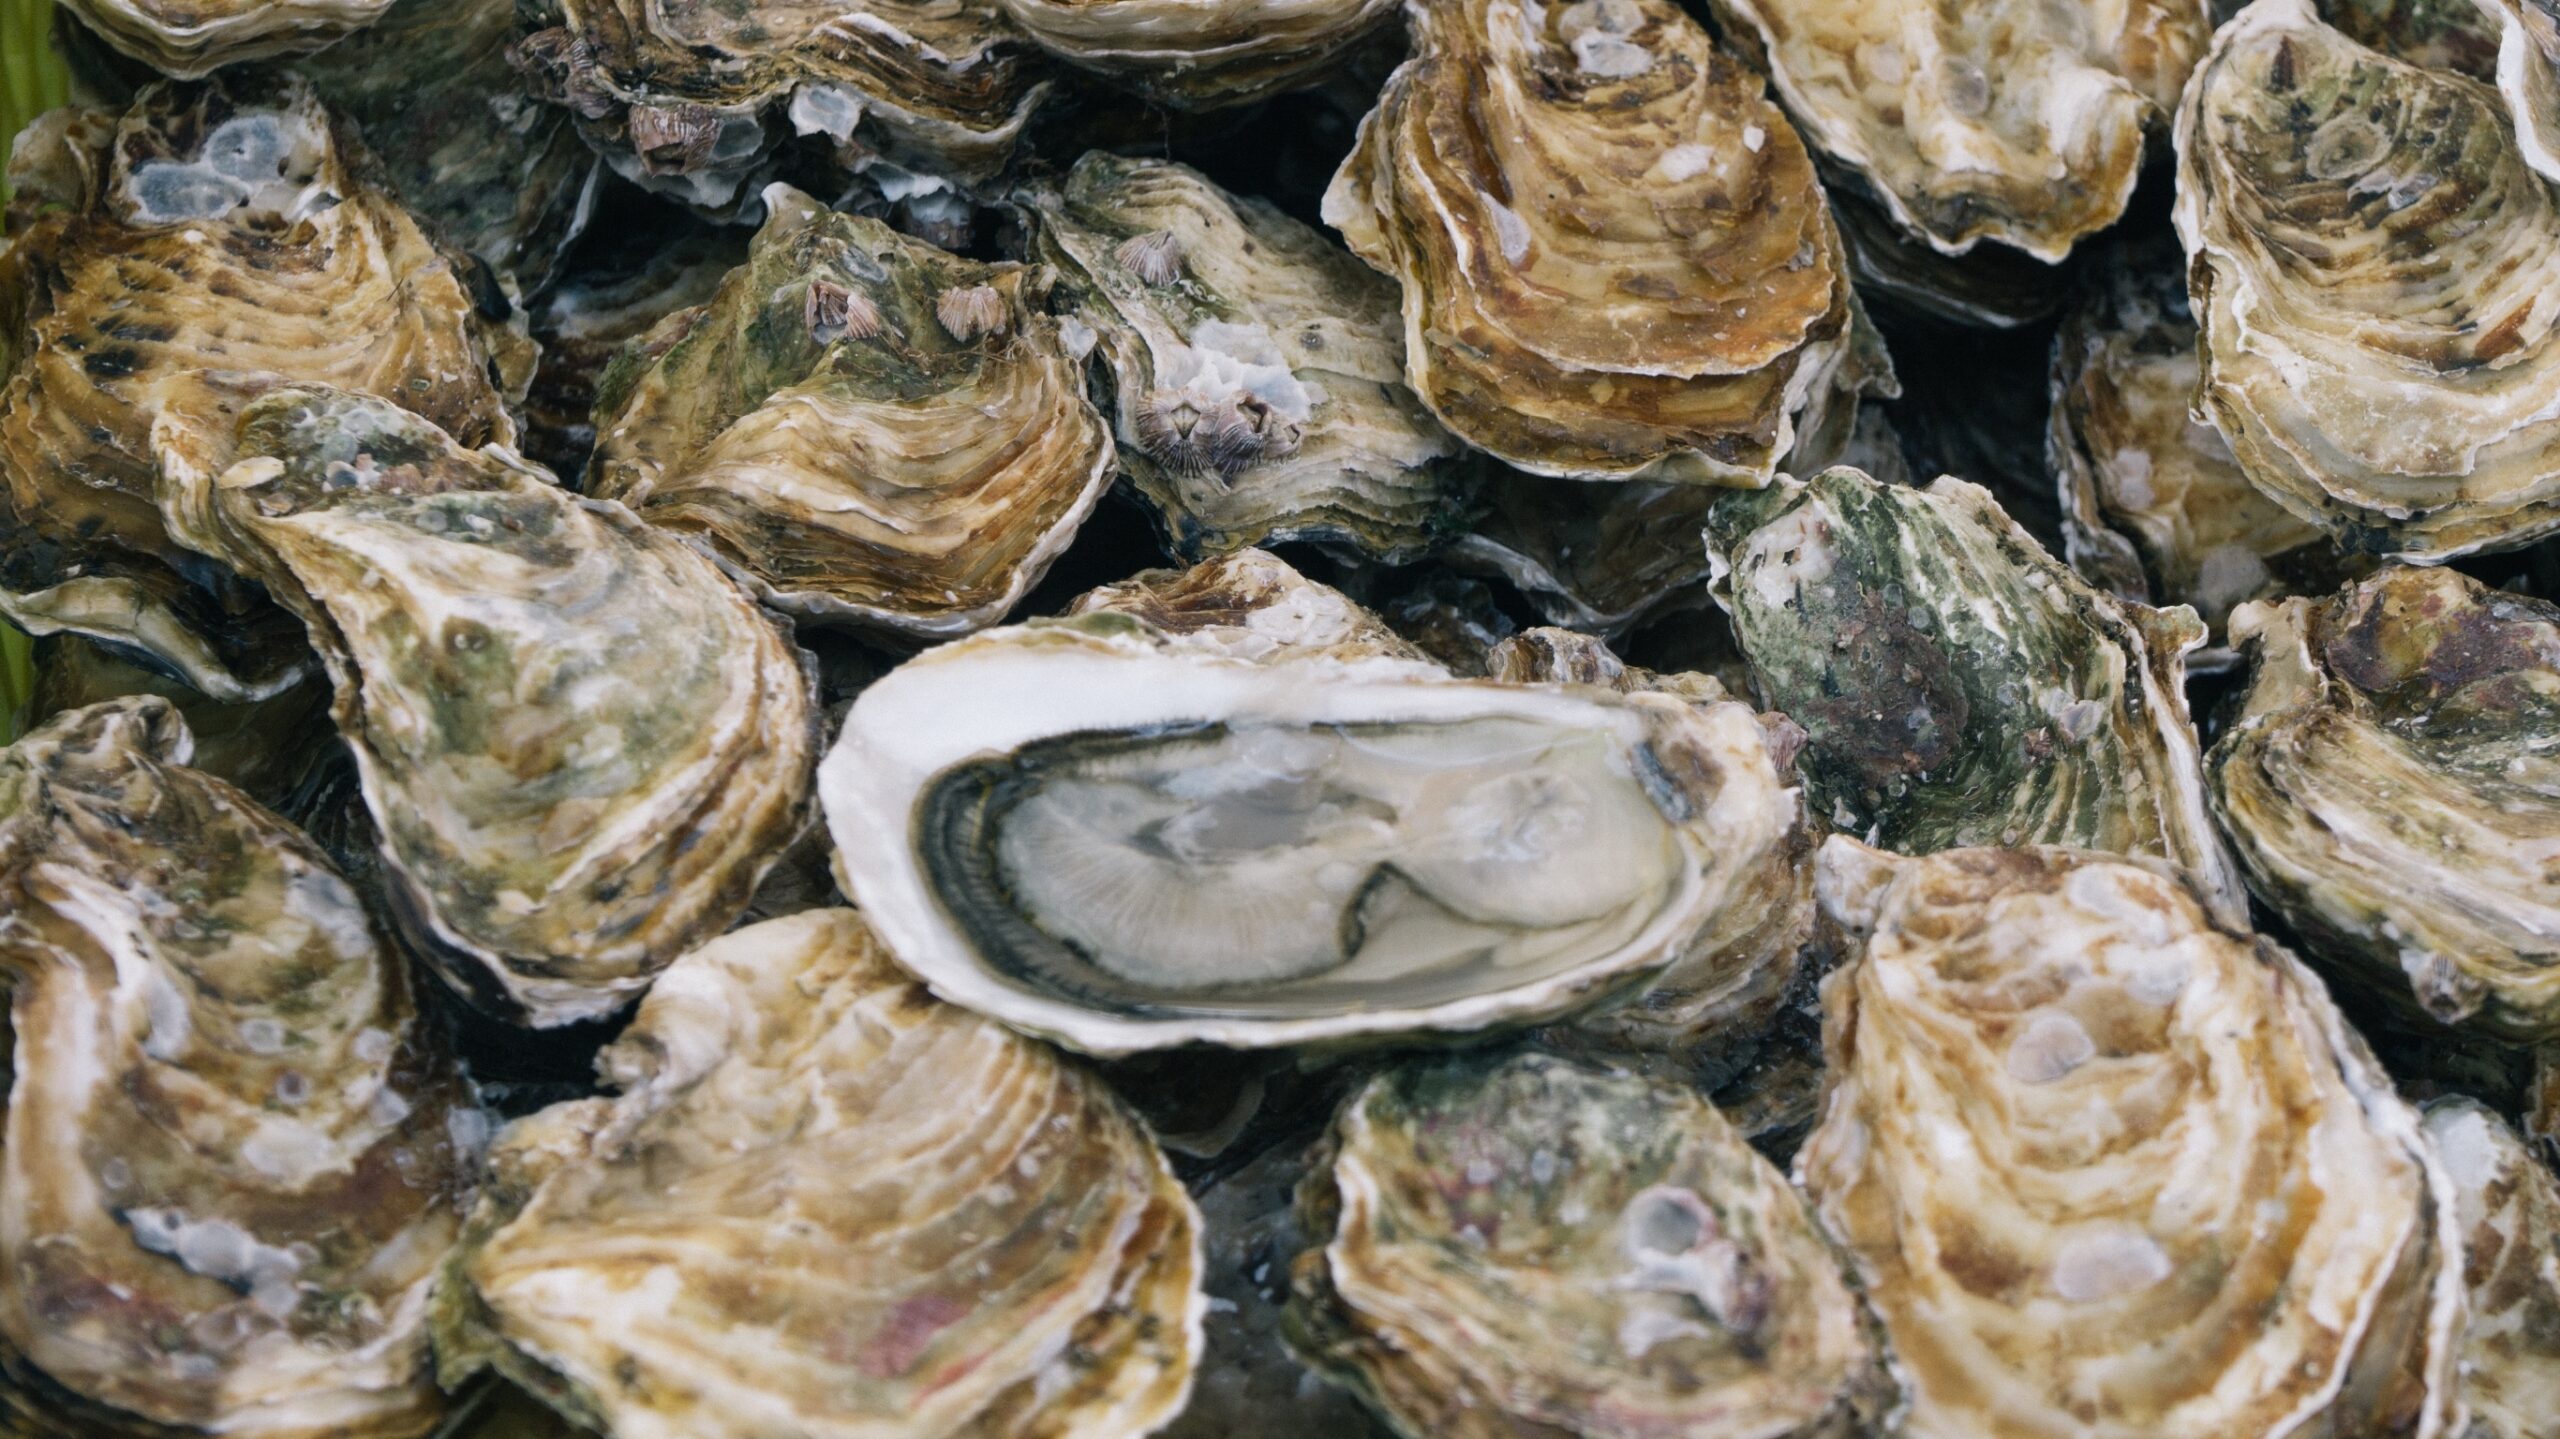 How Oysters Became a Source of Economic Freedom for Emancipated Black Folks